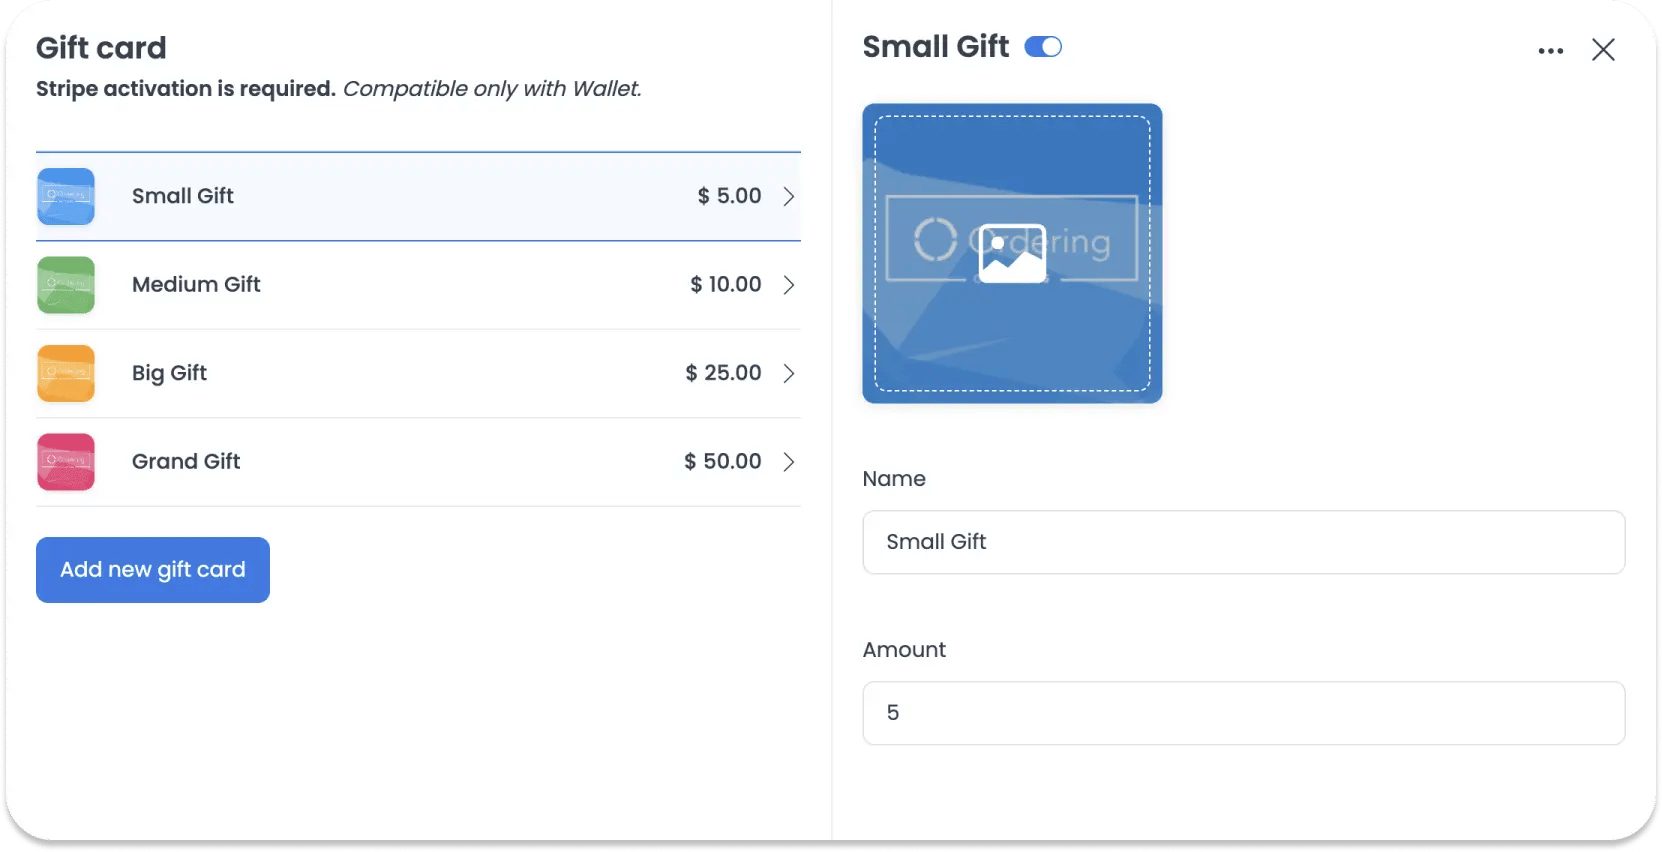 Create as many gift cards as you need